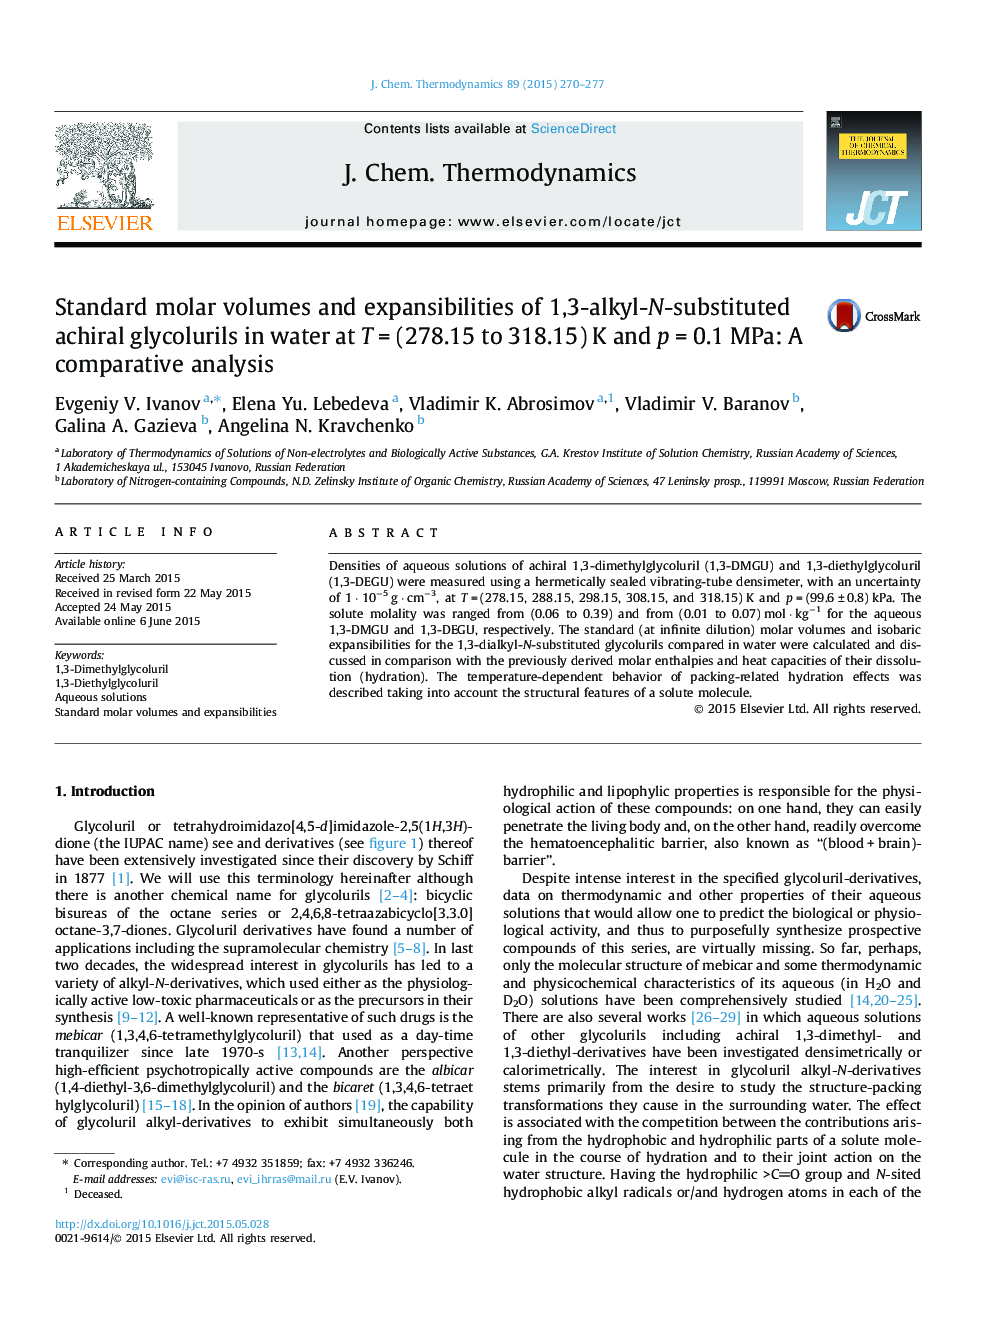 Standard molar volumes and expansibilities of 1,3-alkyl-N-substituted achiral glycolurils in water at TÂ =Â (278.15 to 318.15)Â K and pÂ =Â 0.1Â MPa: A comparative analysis